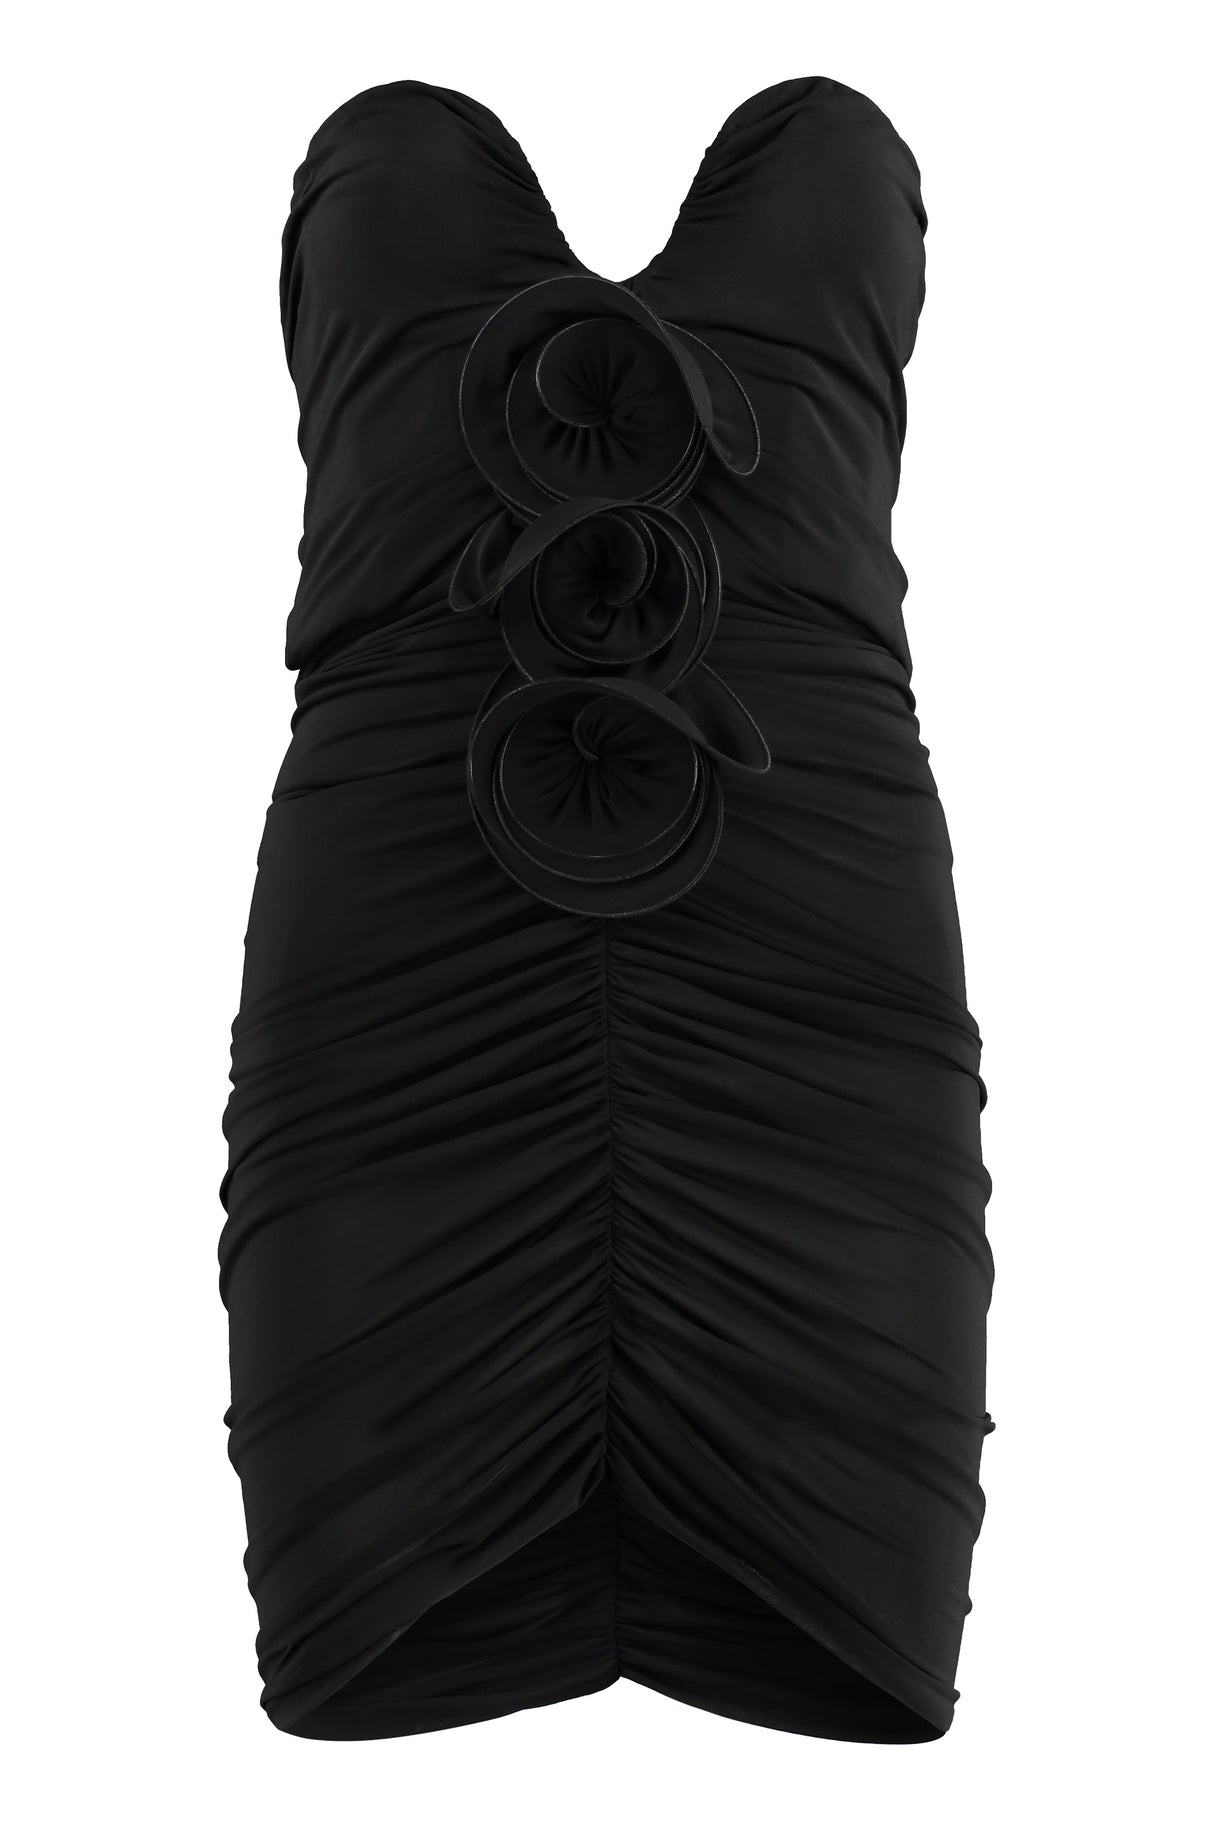 MAGDA BUTRYM Black Viscose Dress with Sweetheart Neckline and Decorative Flowers for Women